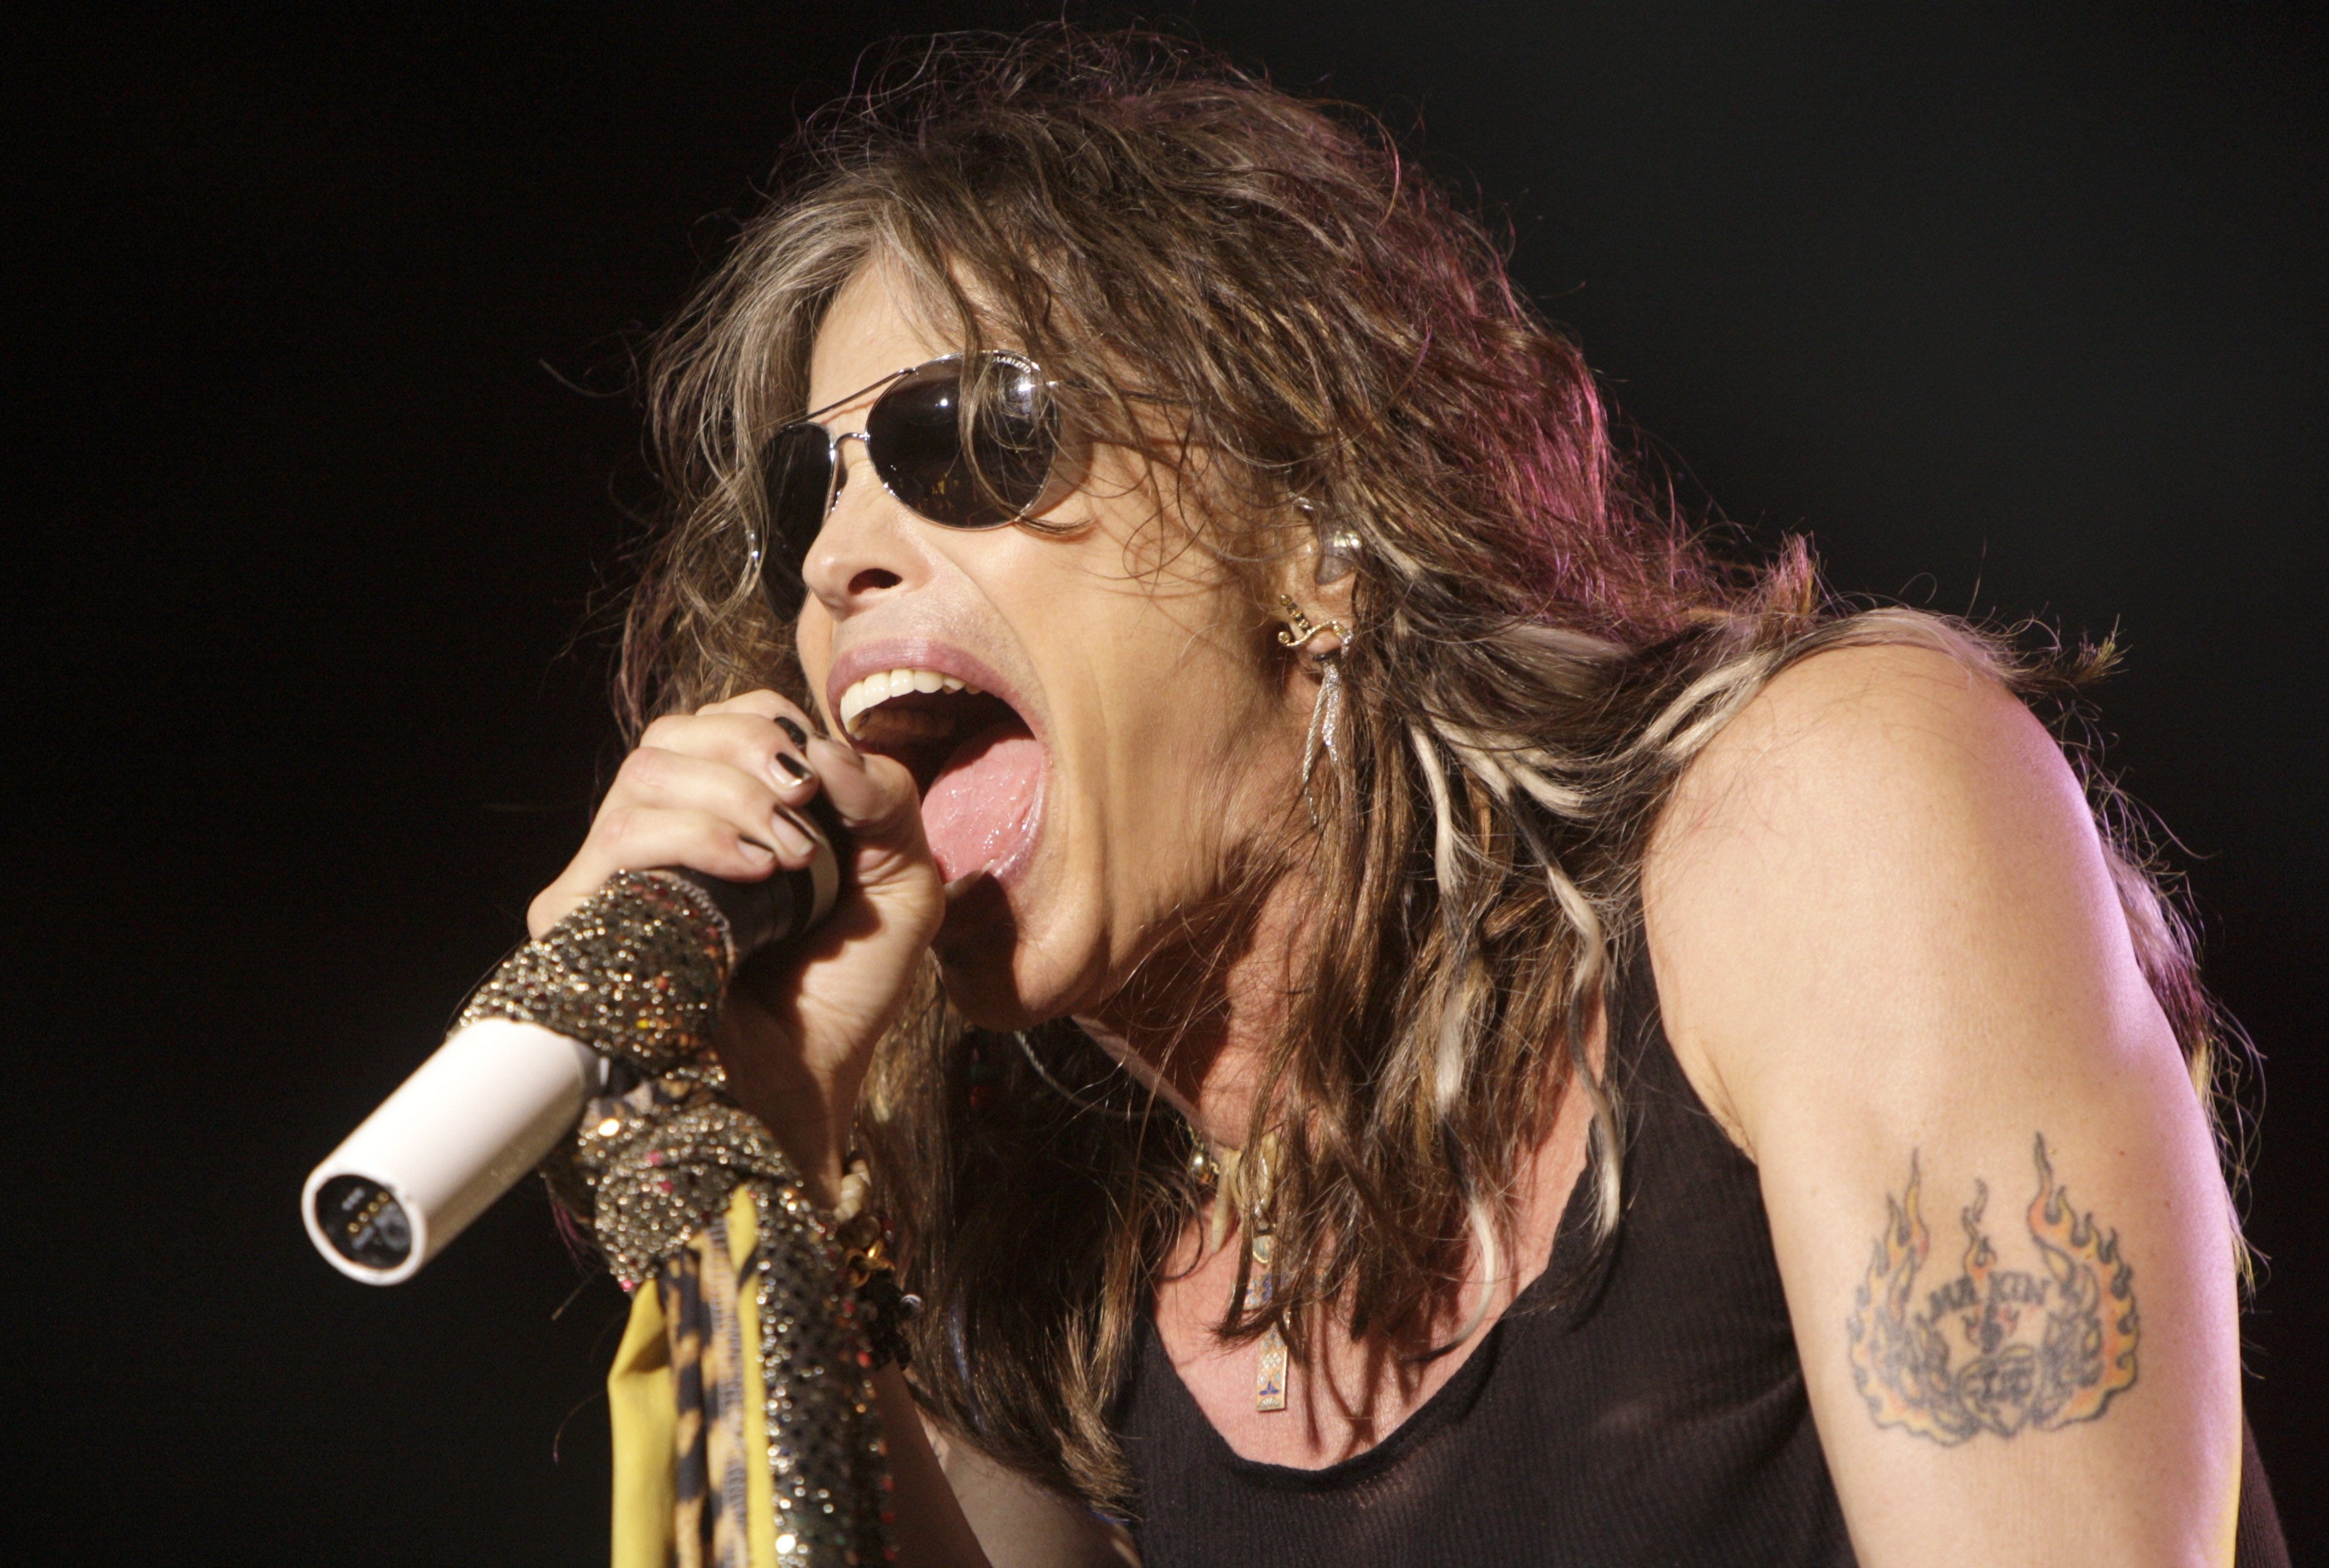 Vocalist  Steven Tyler of the rock band Aerosmith performs at the Verizon Wireless Amphitheatre Wednesday, June 10, 2009, in Maryland Heights, Mo.